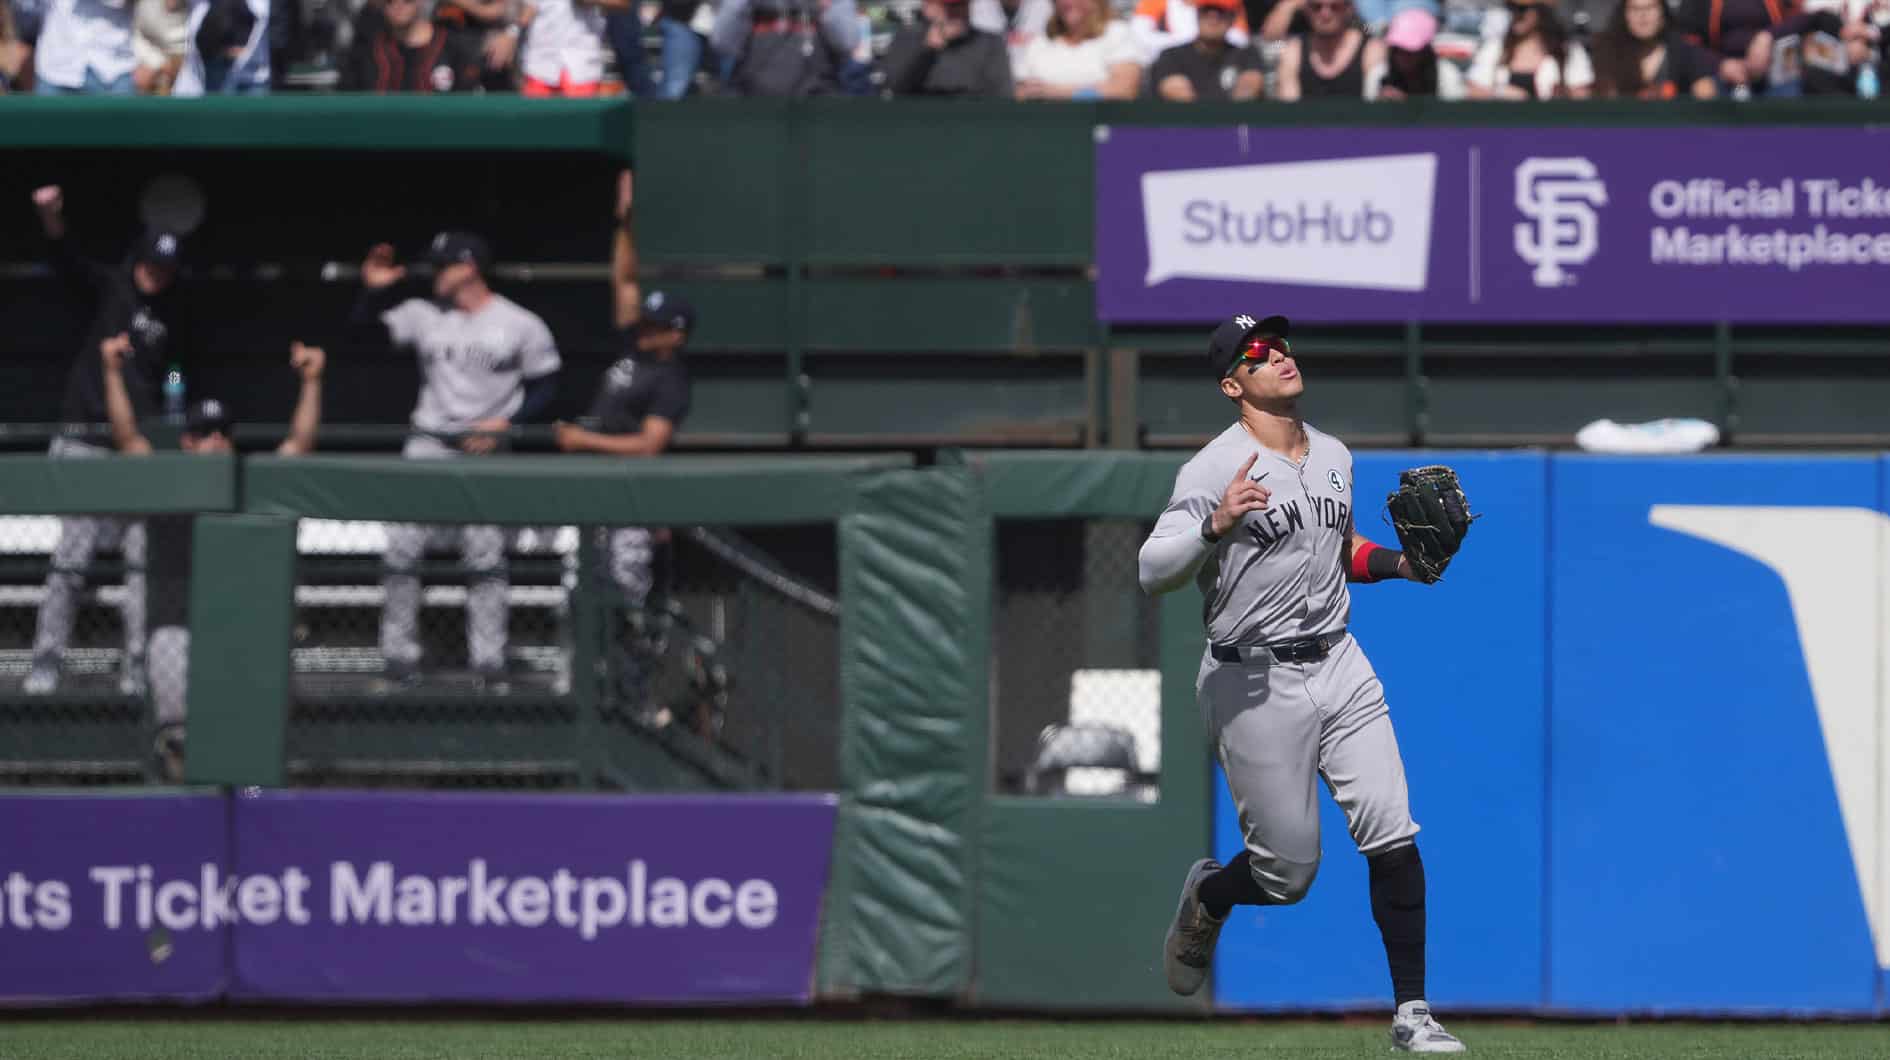 New York Yankees center fielder Aaron Judge (right) gestures after catching a fly ball for the last out of the game during the ninth inning against the San Francisco Giants at Oracle Park